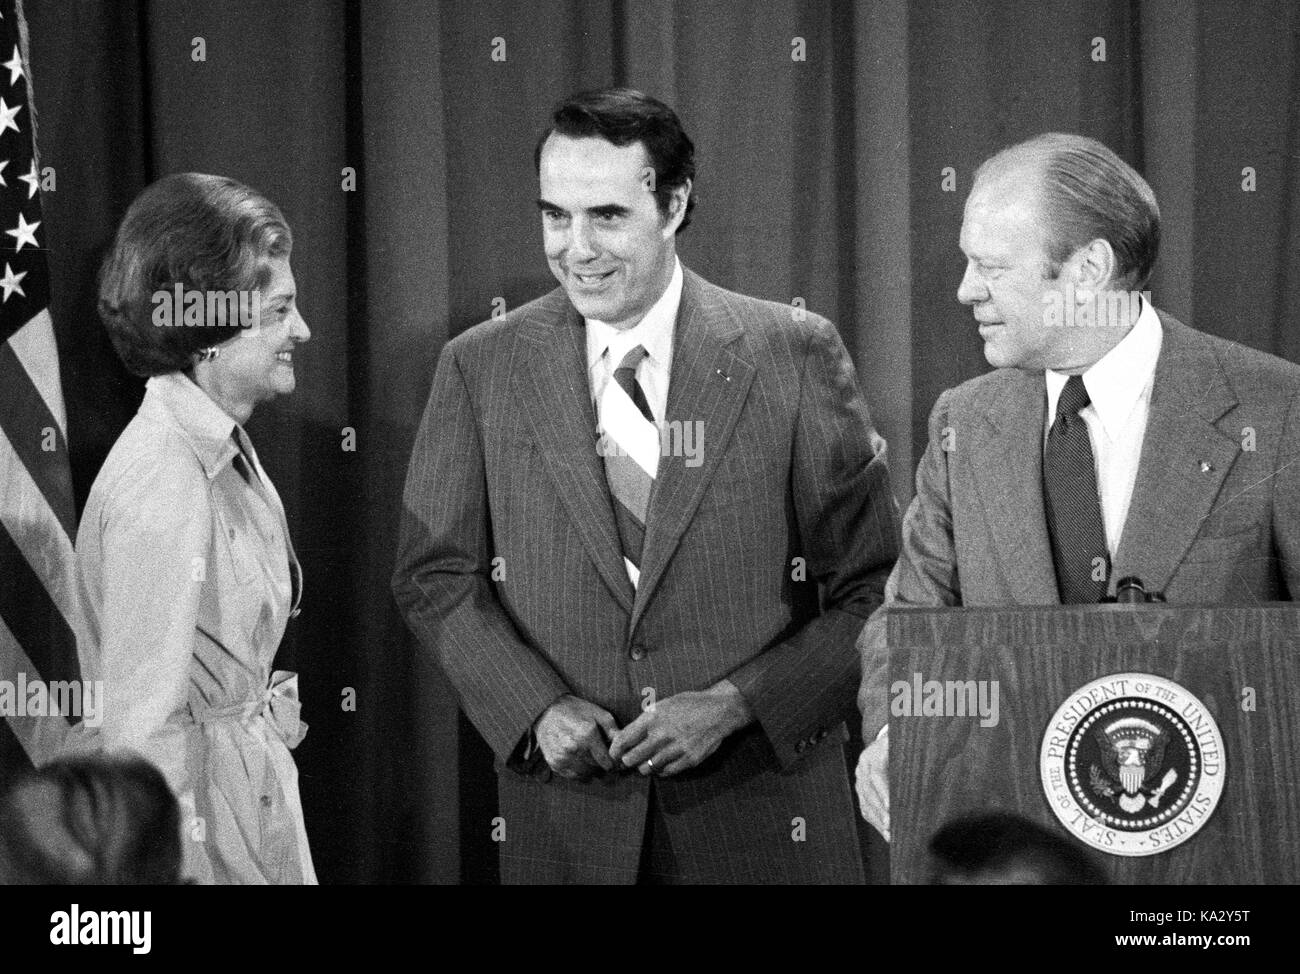 United States President Gerald R. Ford, right, and first lady Betty Ford, left, are photographed with US Senator Bob Dole (Republican of Kansas) in Kansas City, Missouri after the Chief Executive named him as his running mate in the 1976 Presidential election on August 18, 1976. Both men will be running on the Republican ticket. Credit: Arnie Sachs/CNP - NO WIRE SERVICE - Photo: Arnie Sachs/Consolidated News Photos/Arnie Sachs - CNP Stock Photo